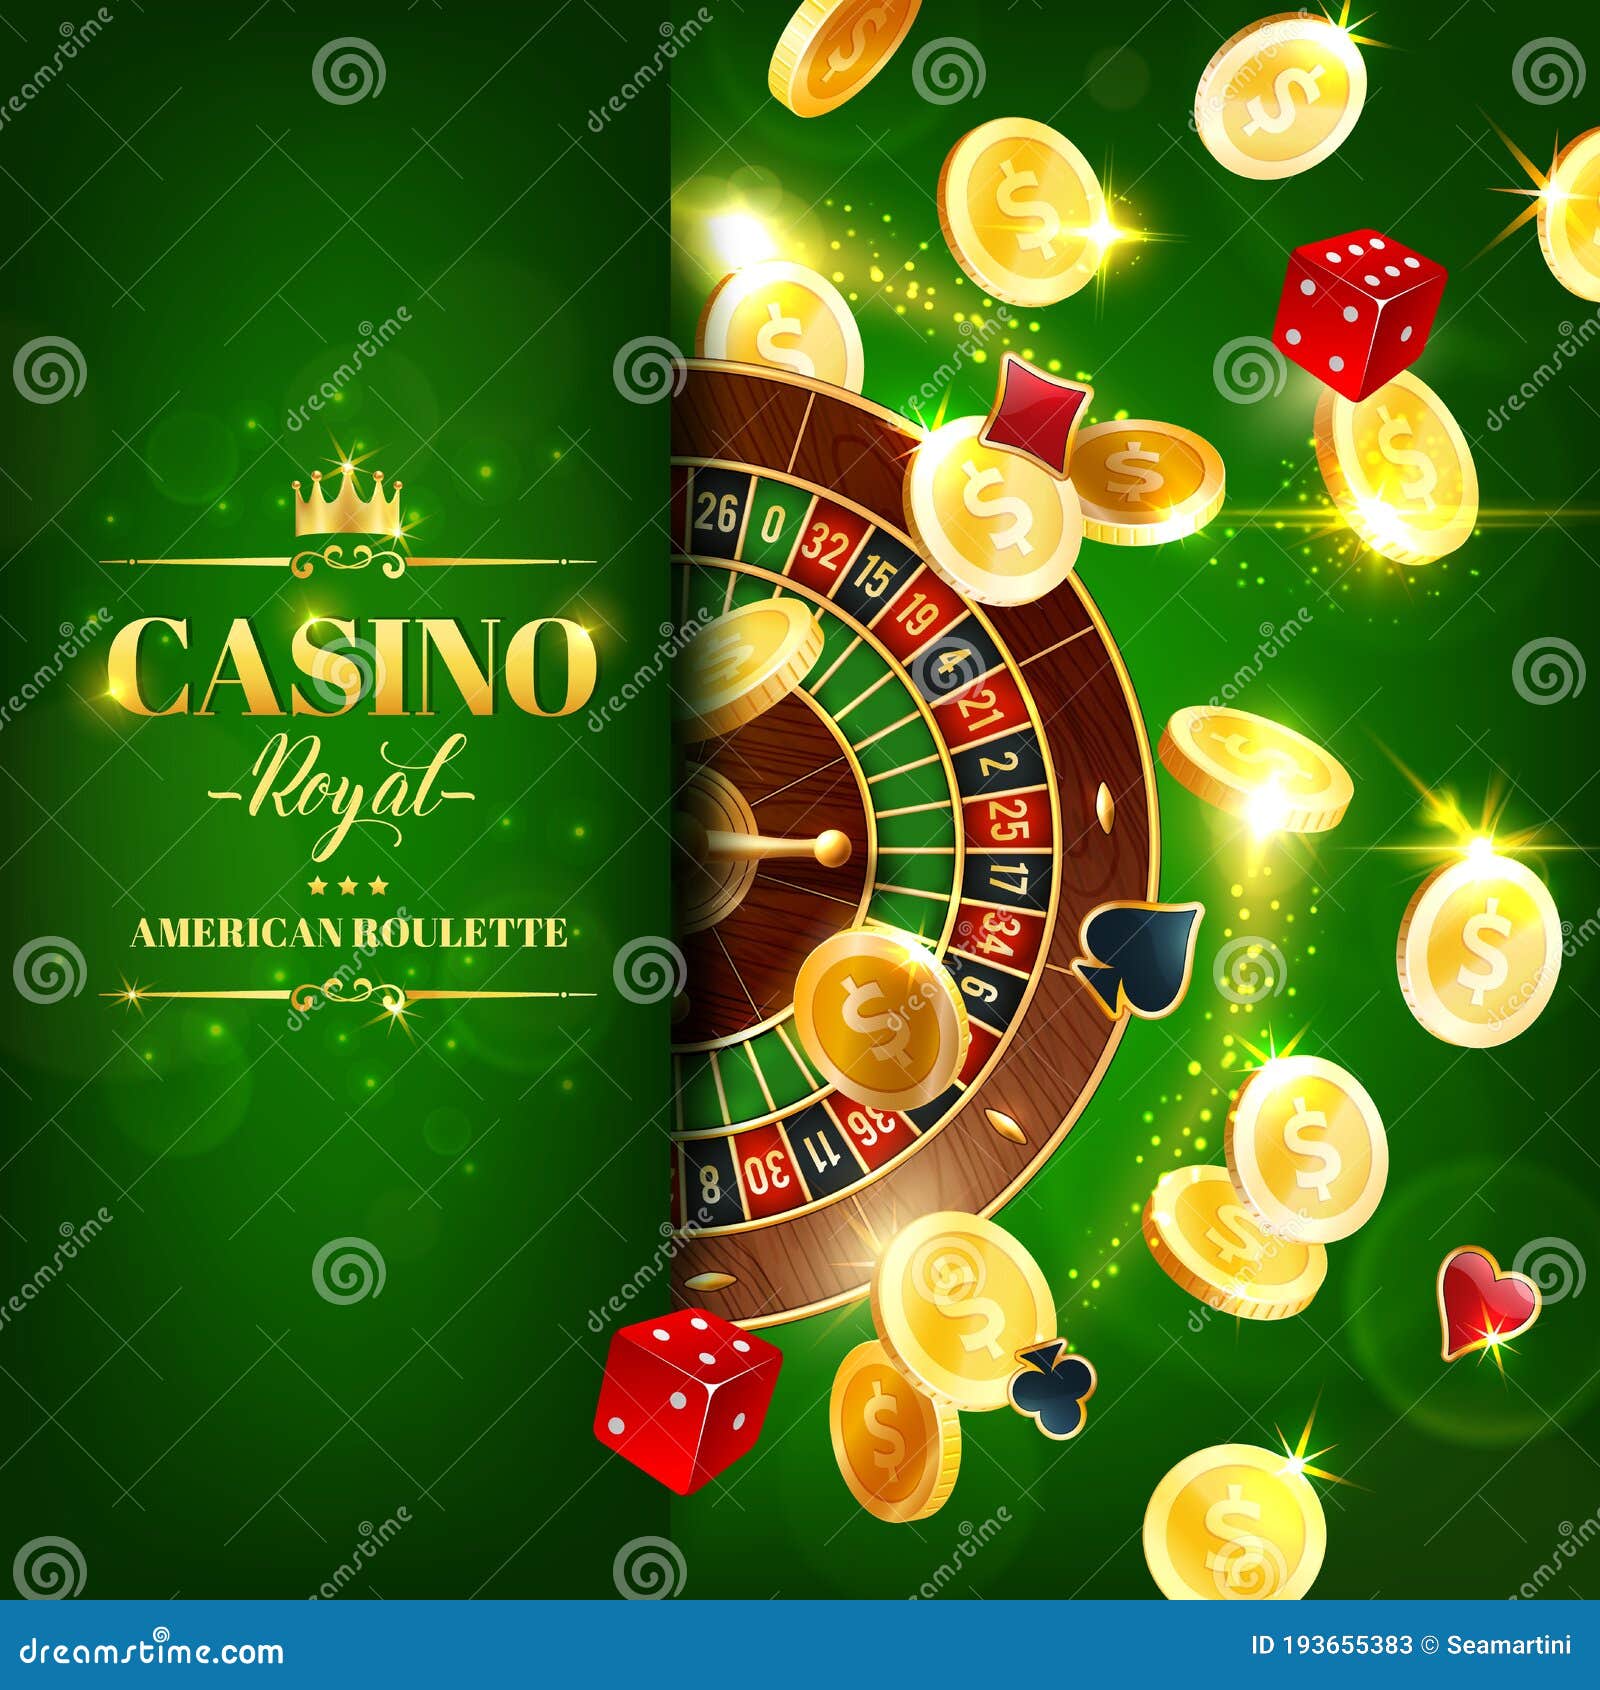 casino: An Incredibly Easy Method That Works For All